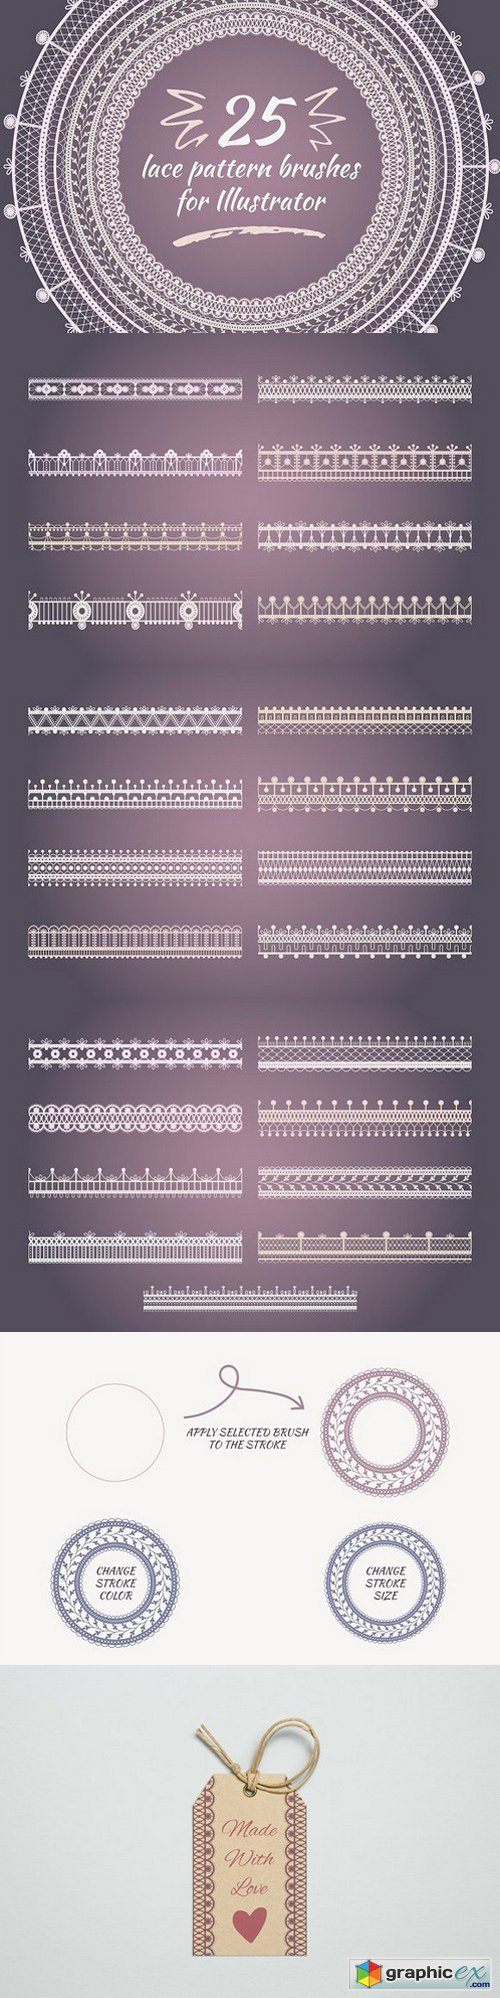 Lace pattern brushes for Illustrator